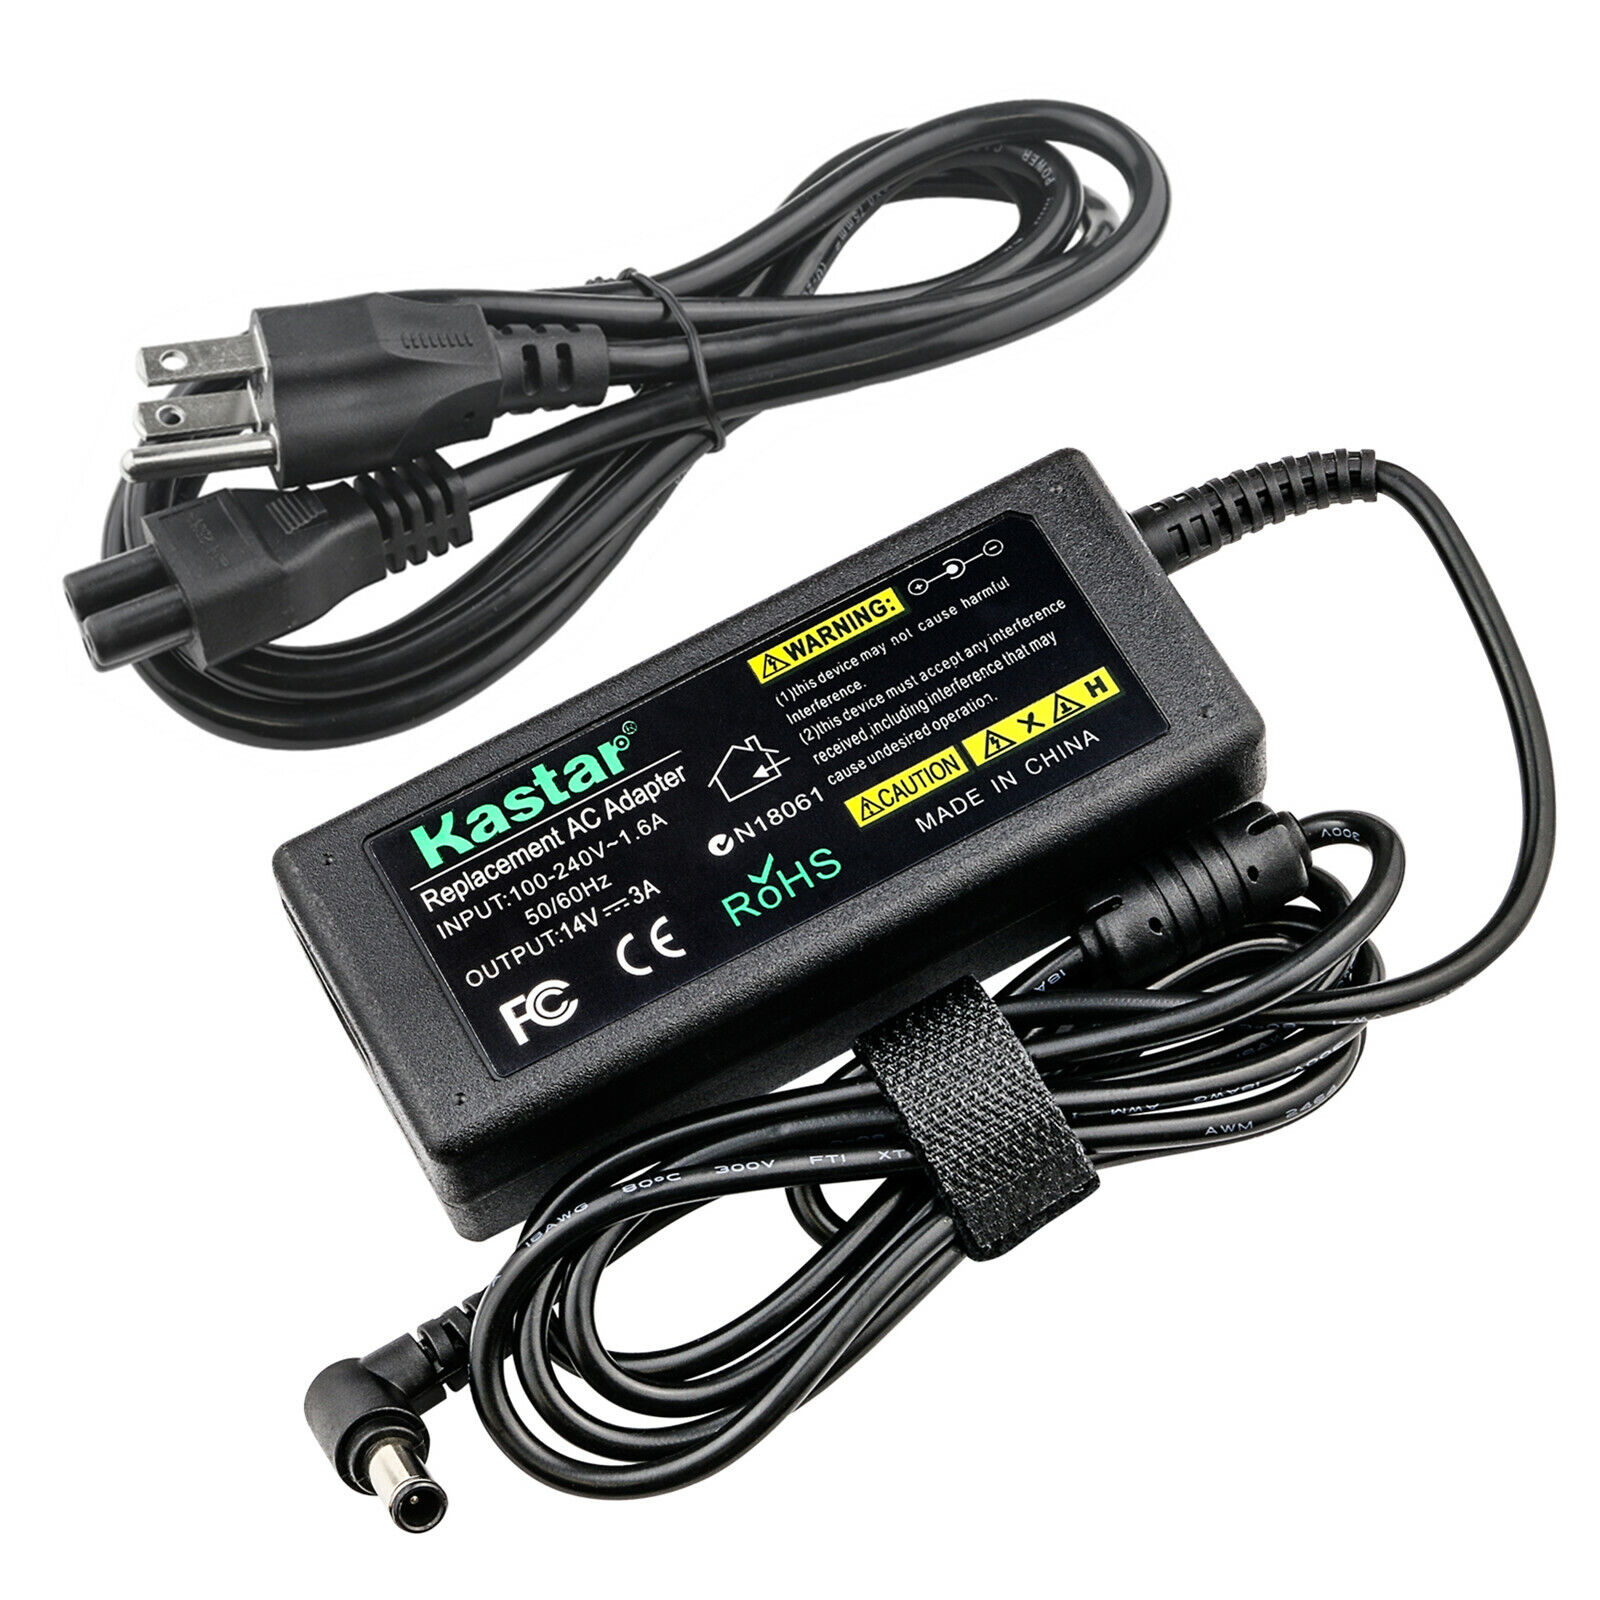 Kastar 14V AC/DC Adapter Power Supply for Samsung LTM1555B LCD Monitor S20A350B For Sale Kastar AC Adapter Fully Compat - Click Image to Close